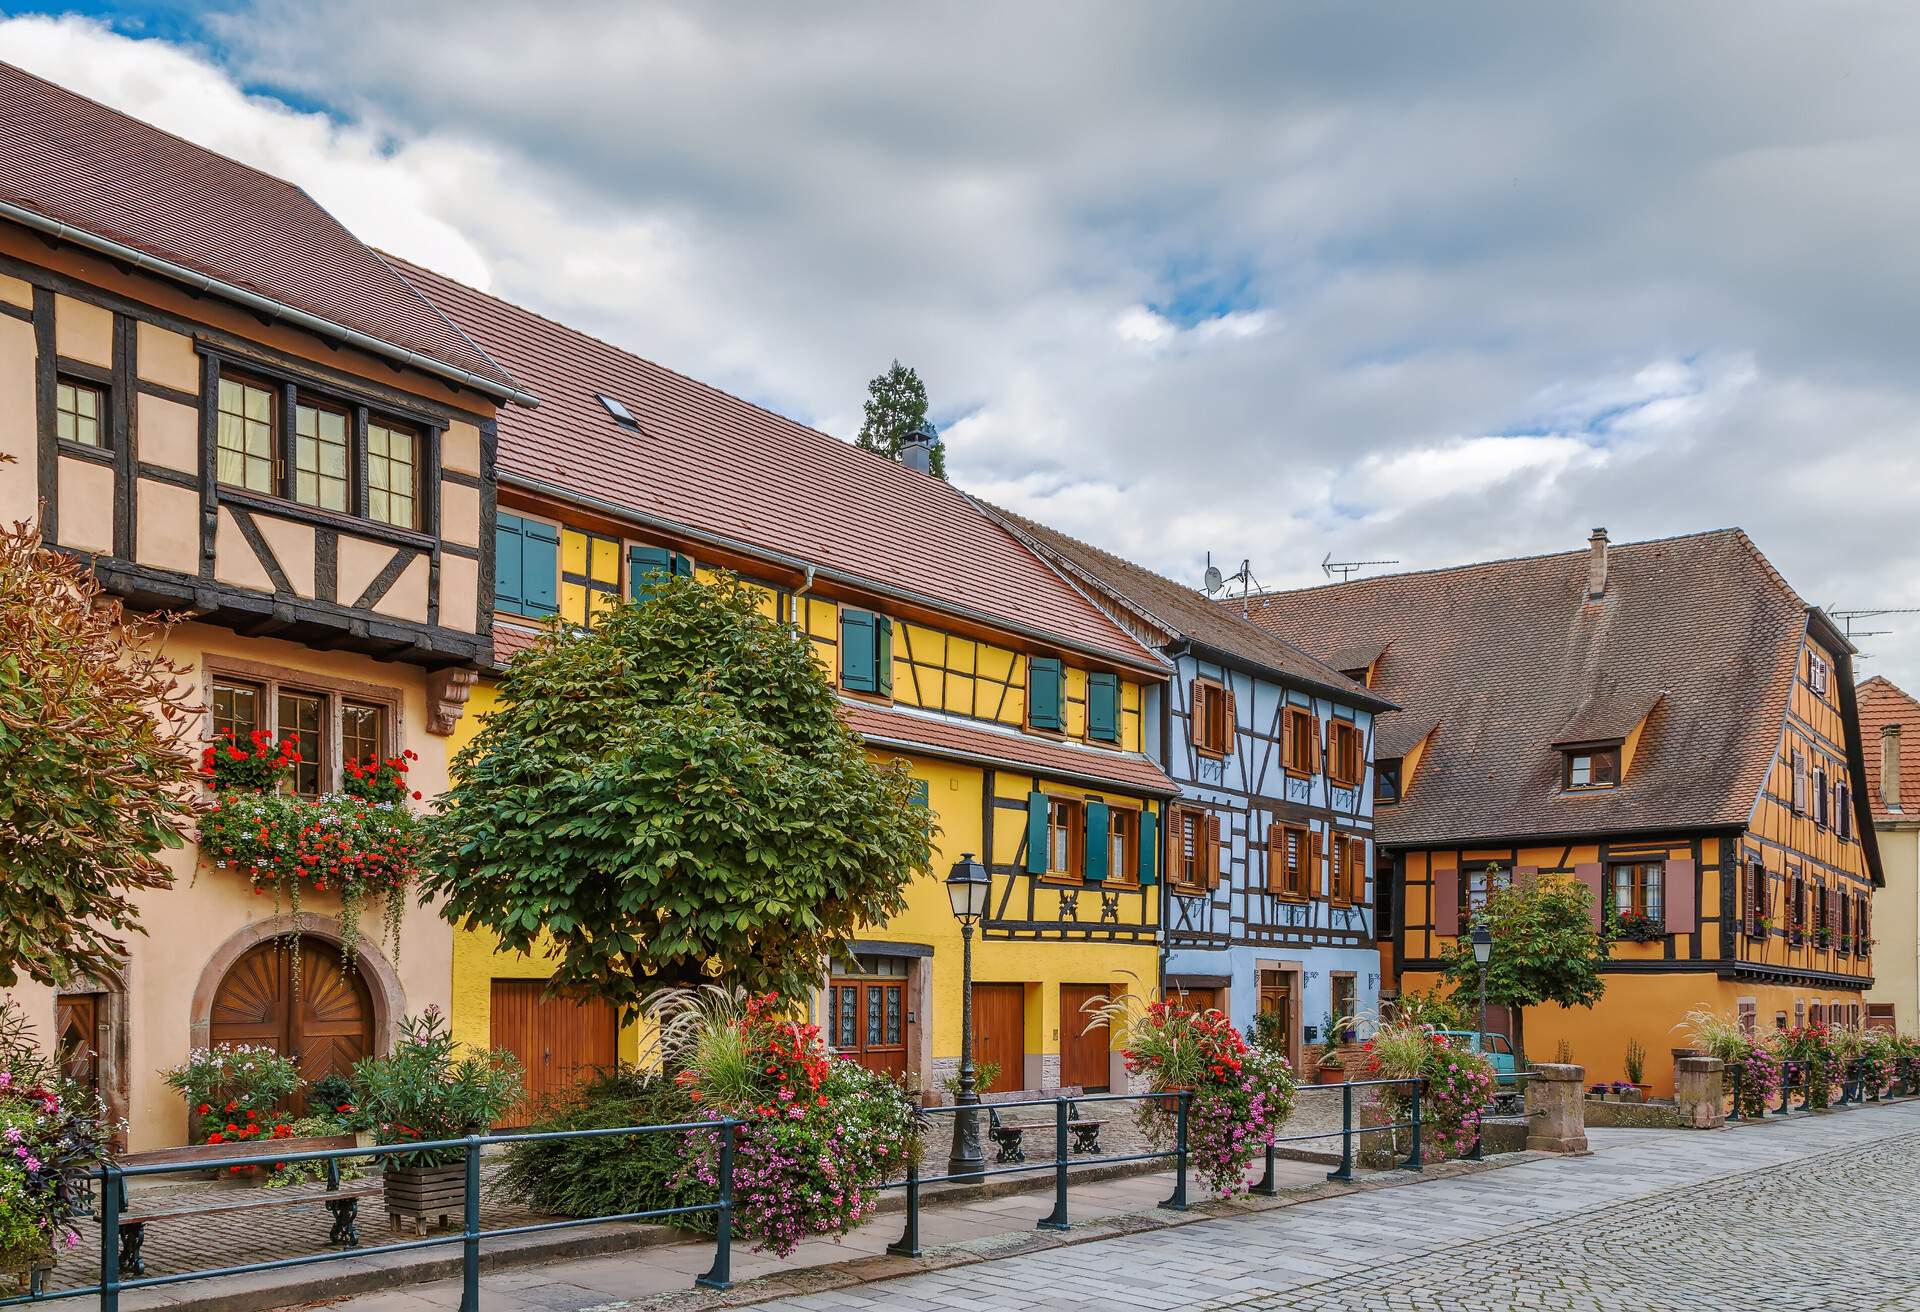 Street with historical houses in Ribeauville, Alsace, France; Shutterstock ID 549071725